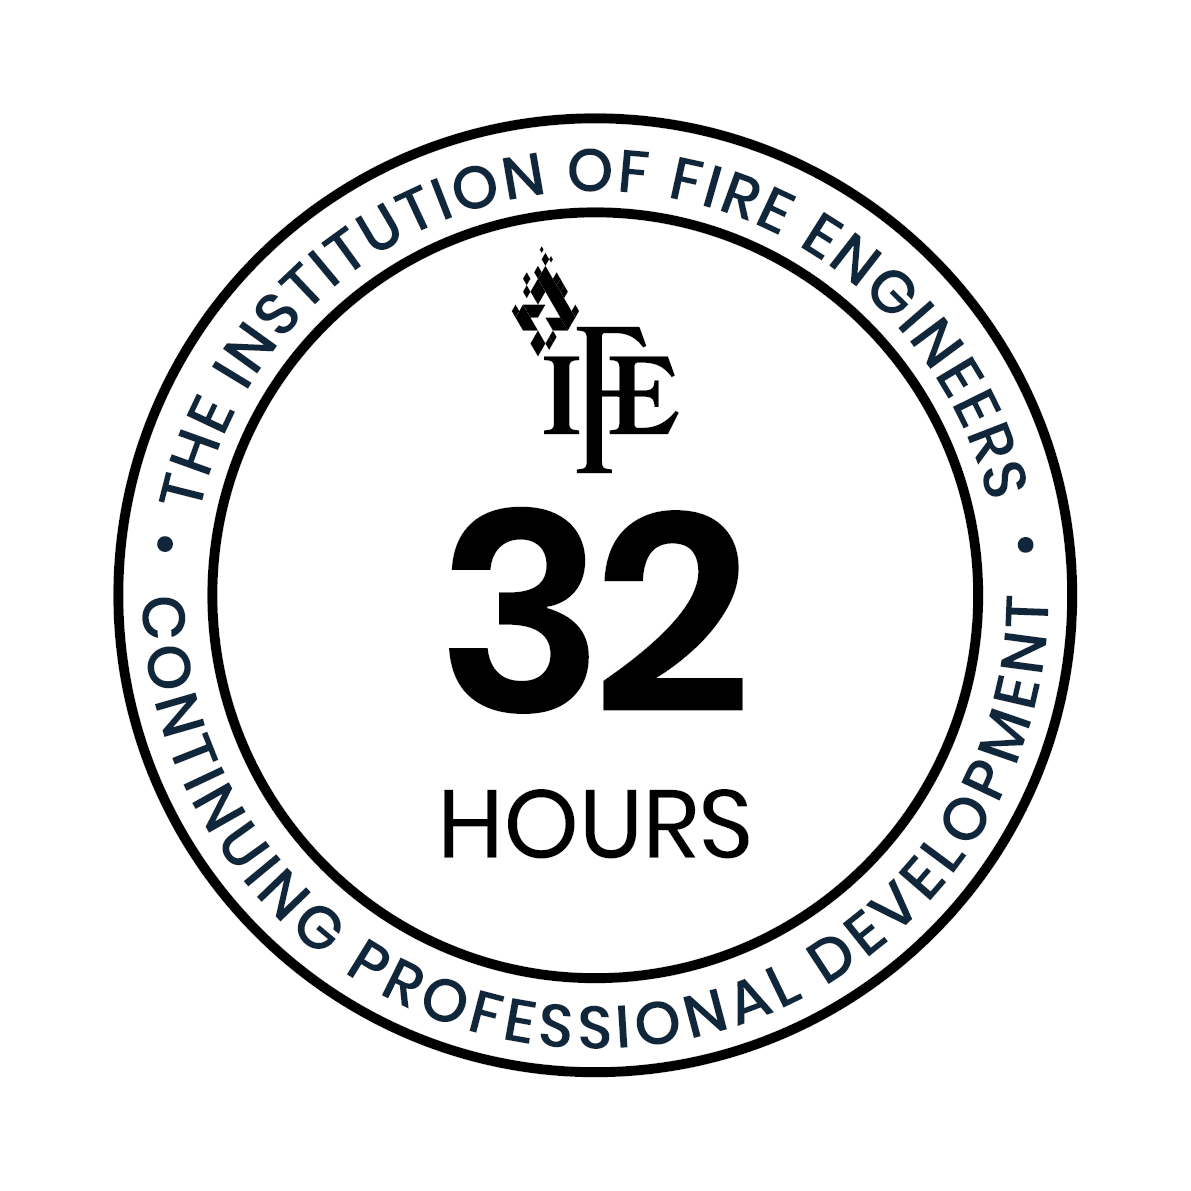 IFE validation logo for 32 hours CPD